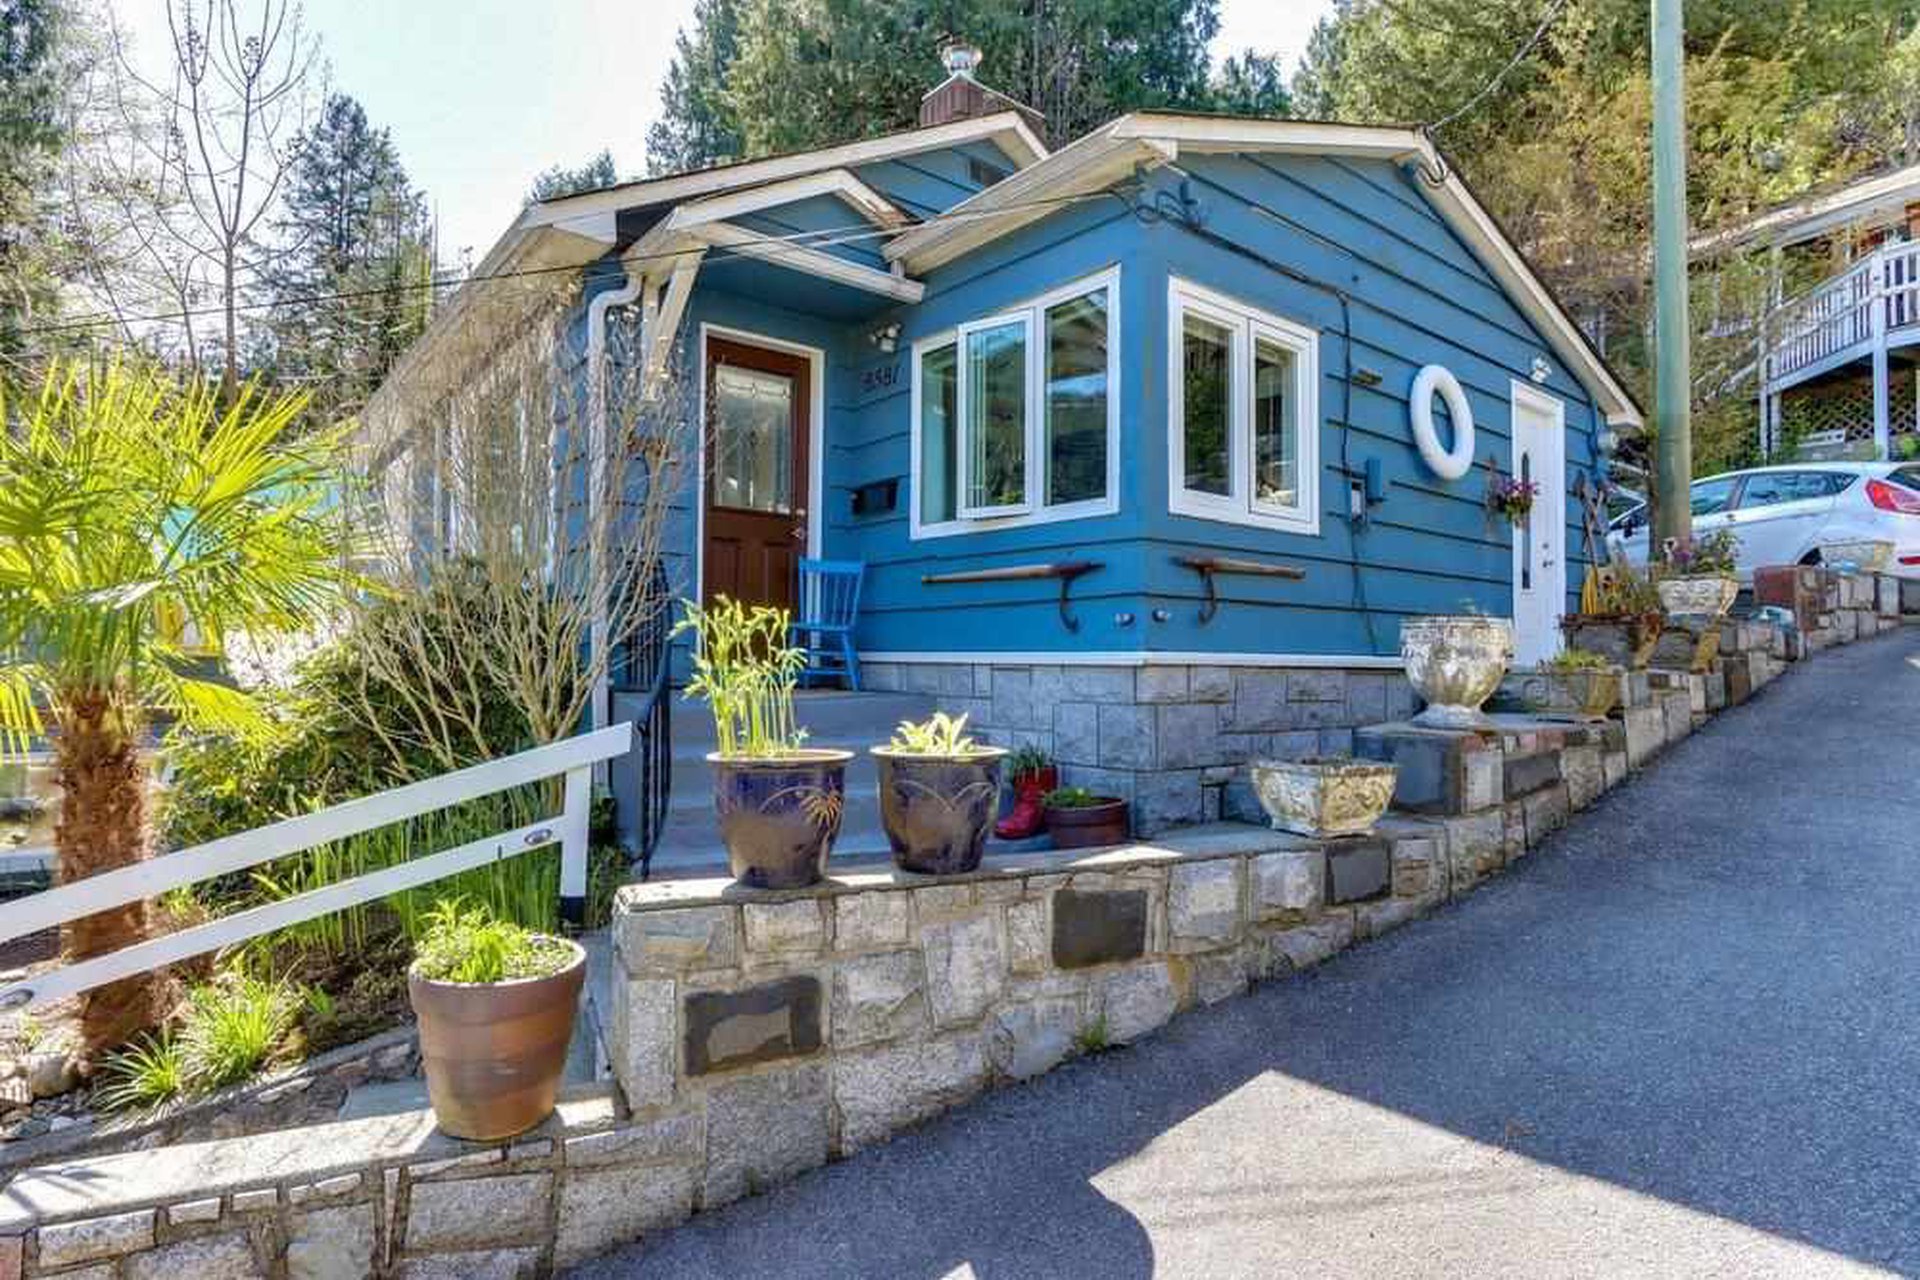 The Horseshoe Bay Cottages for sale asking price sale price